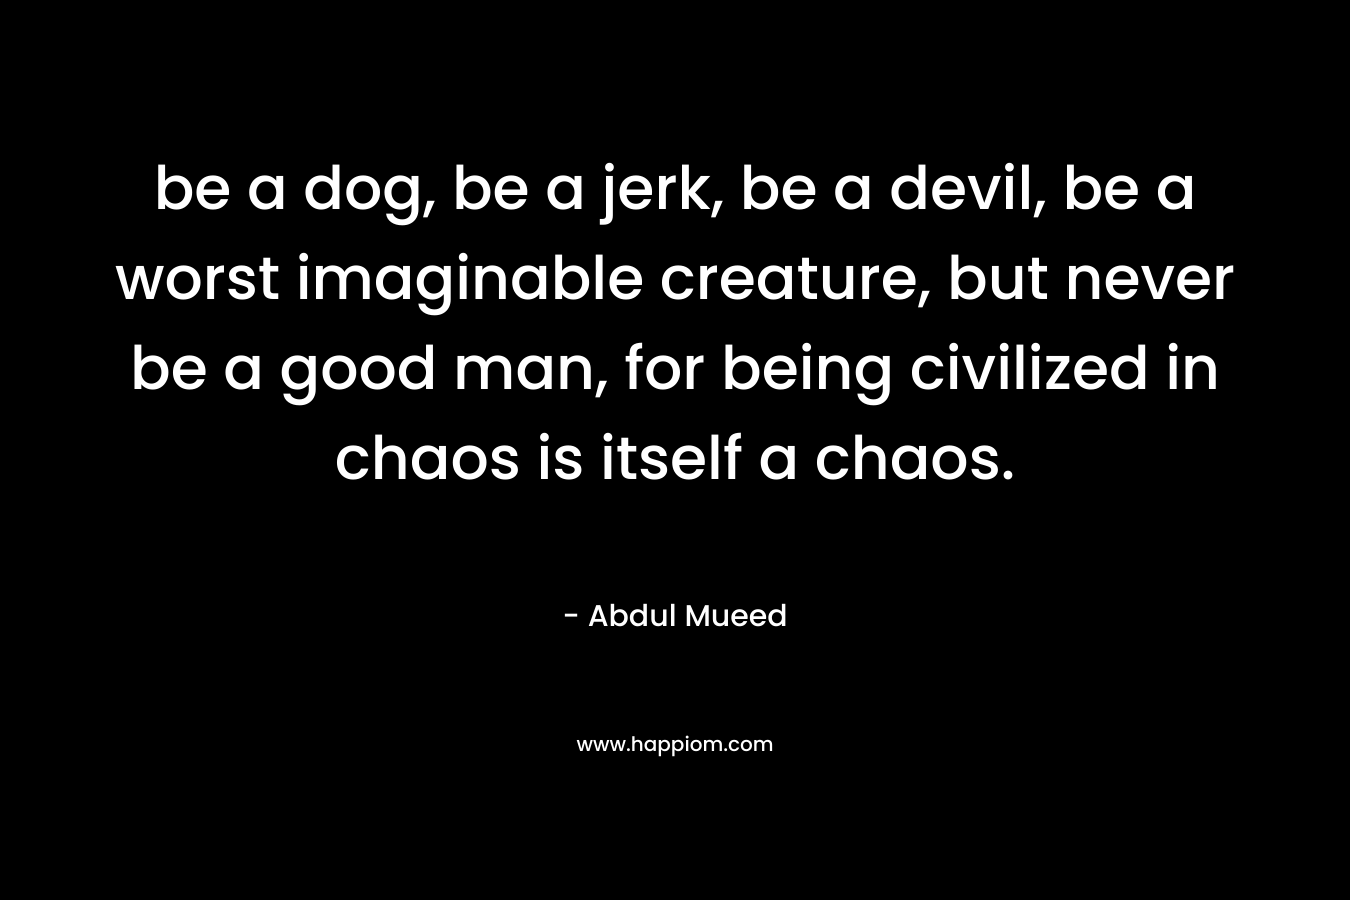 be a dog, be a jerk, be a devil, be a worst imaginable creature, but never be a good man, for being civilized in chaos is itself a chaos. – Abdul Mueed